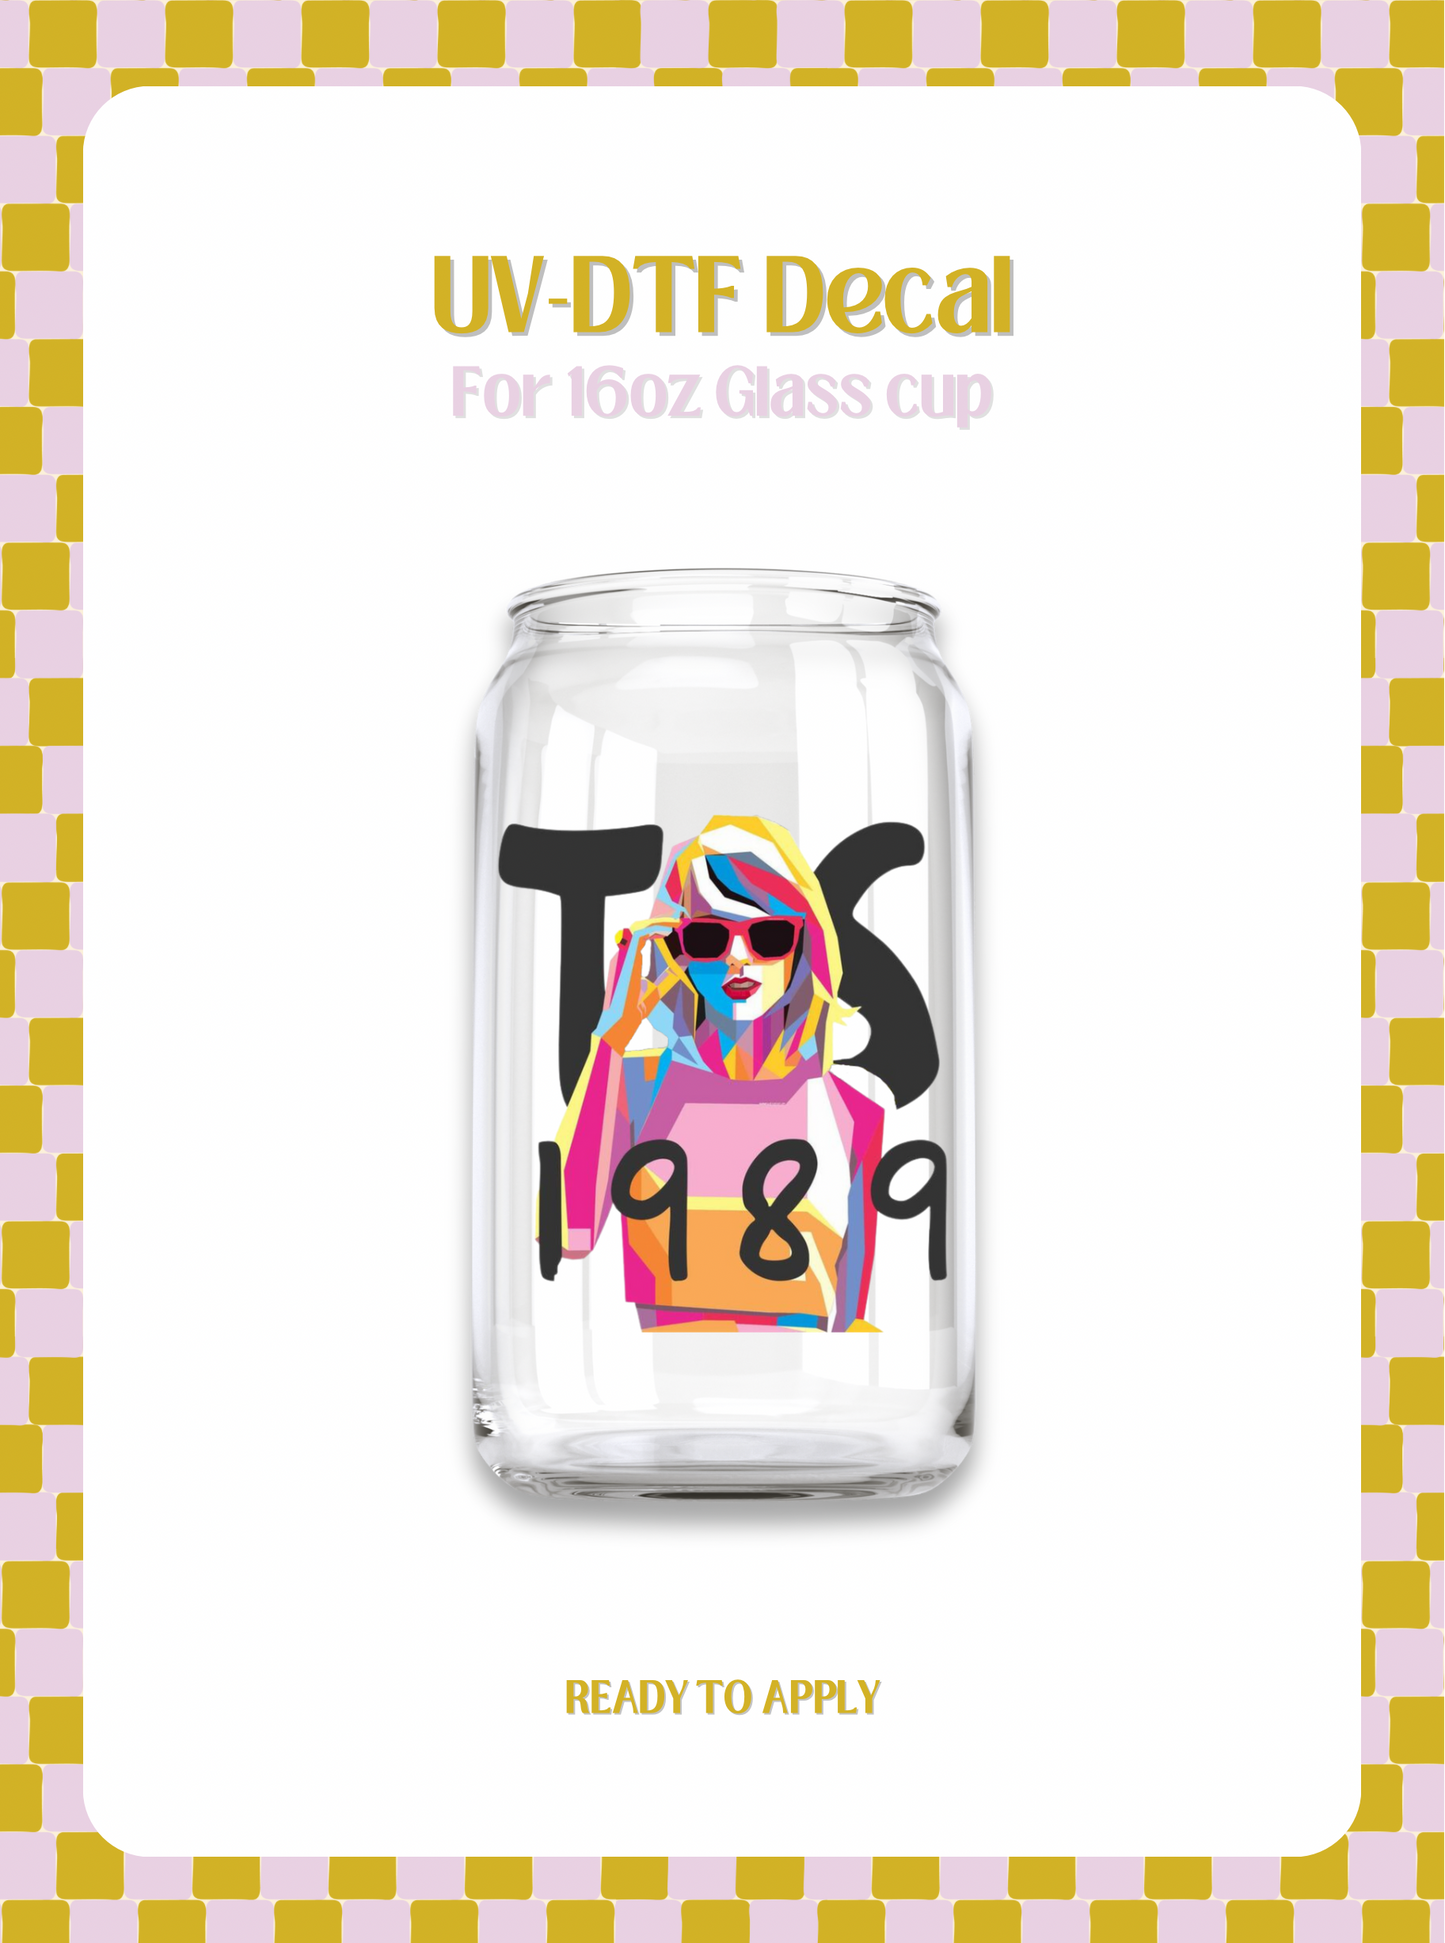 TS 1989 UV-DTF Decal